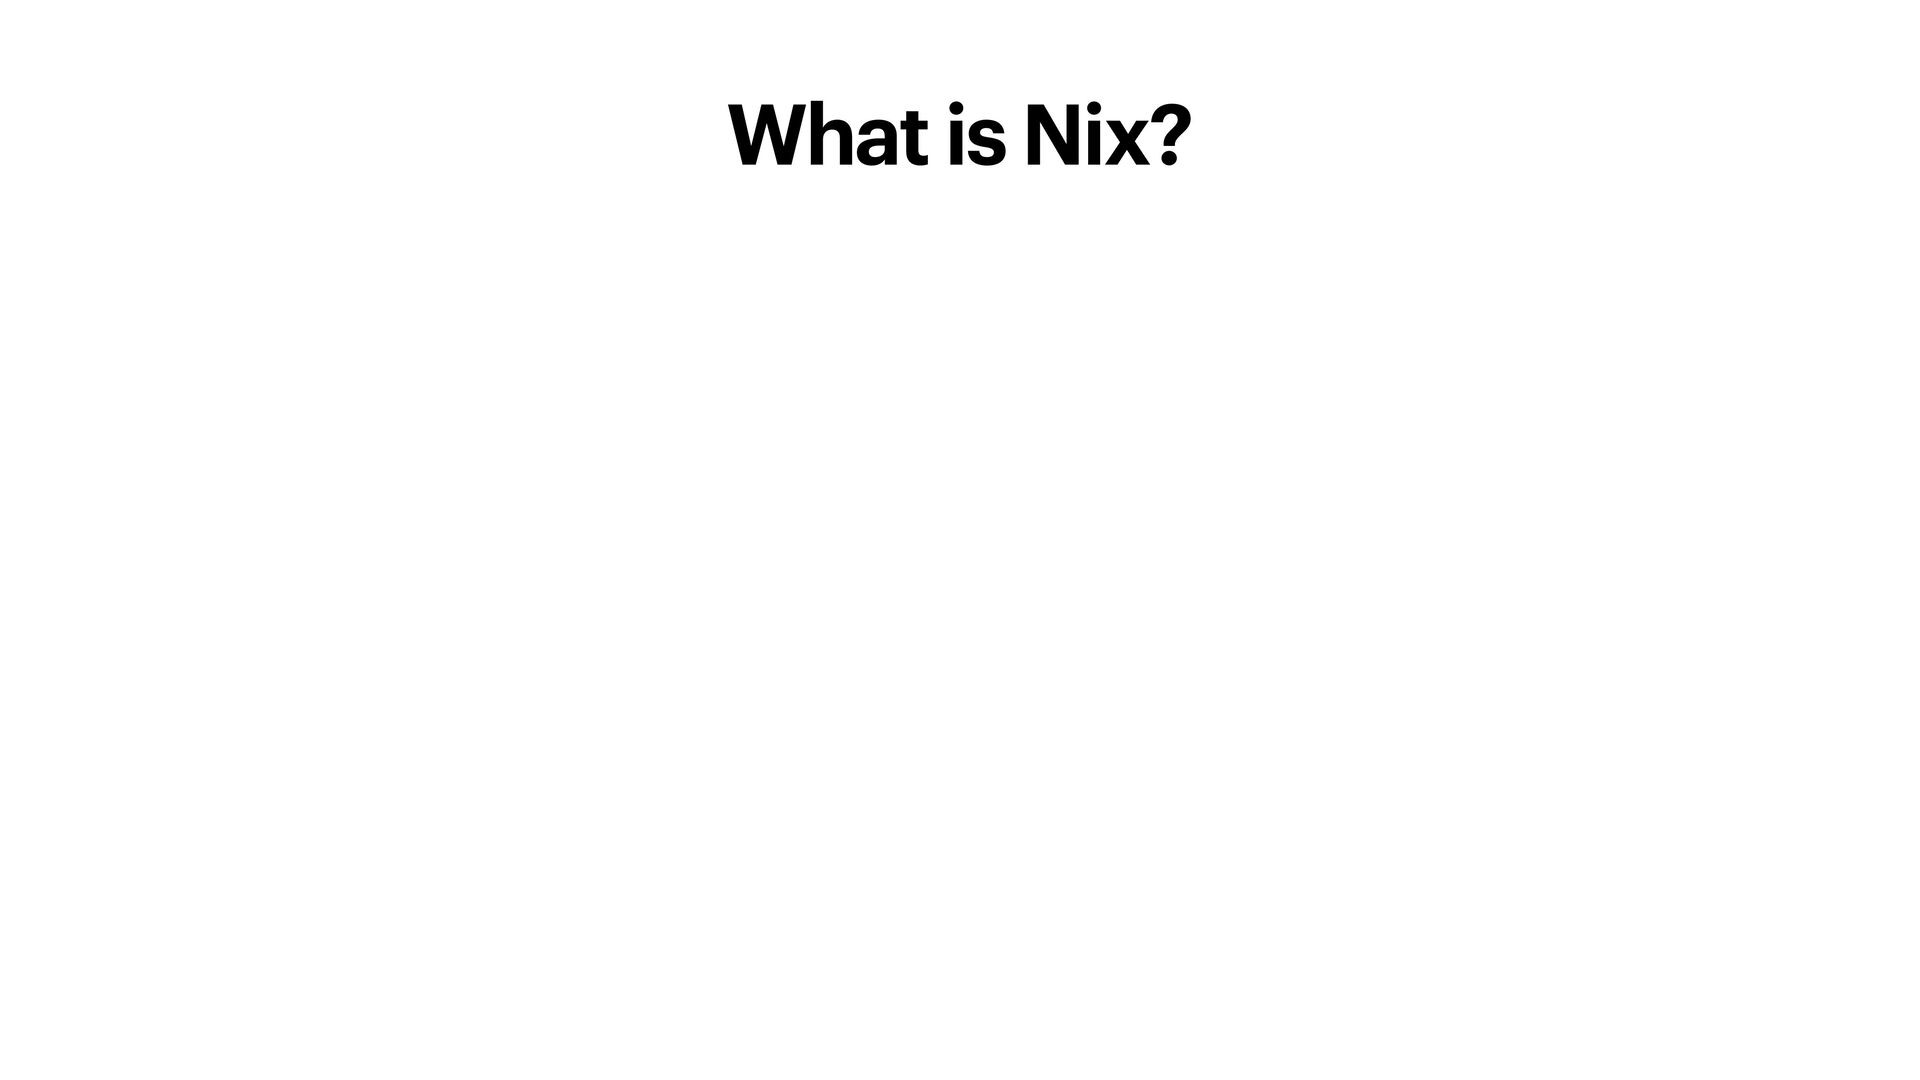 What is Nix?